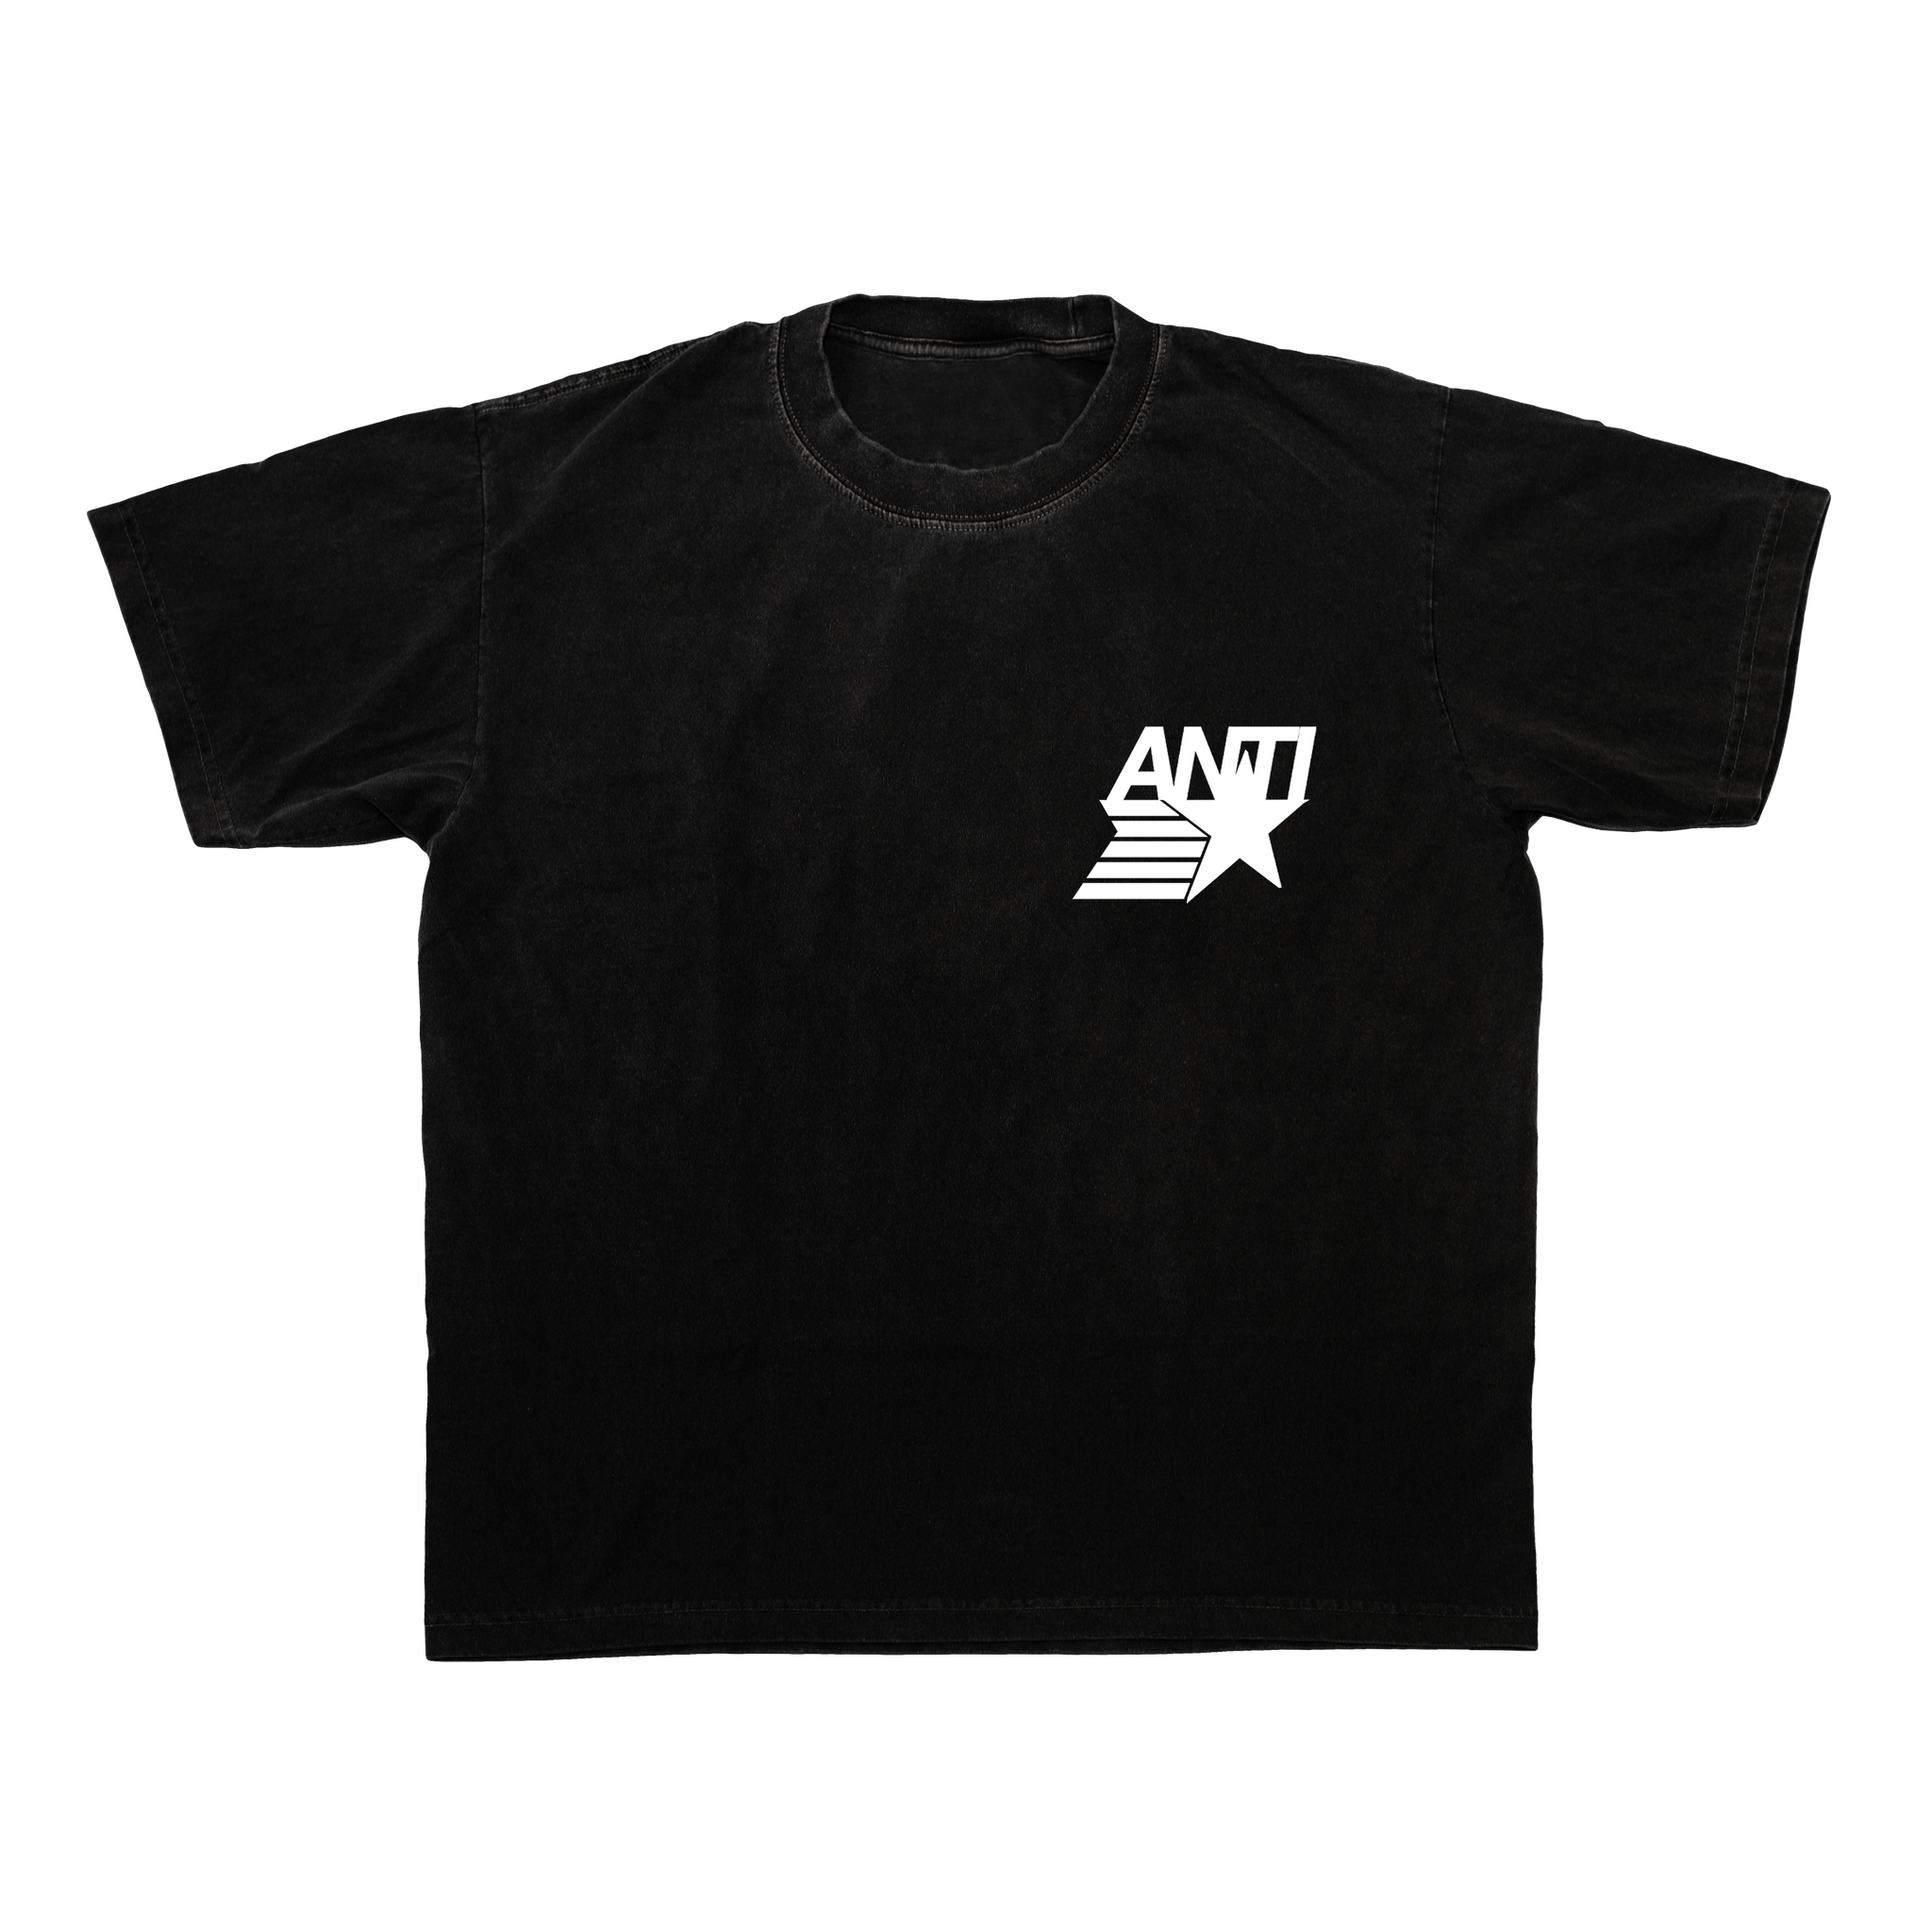 ROOKIE OF THE YEAR TEE - BLACK